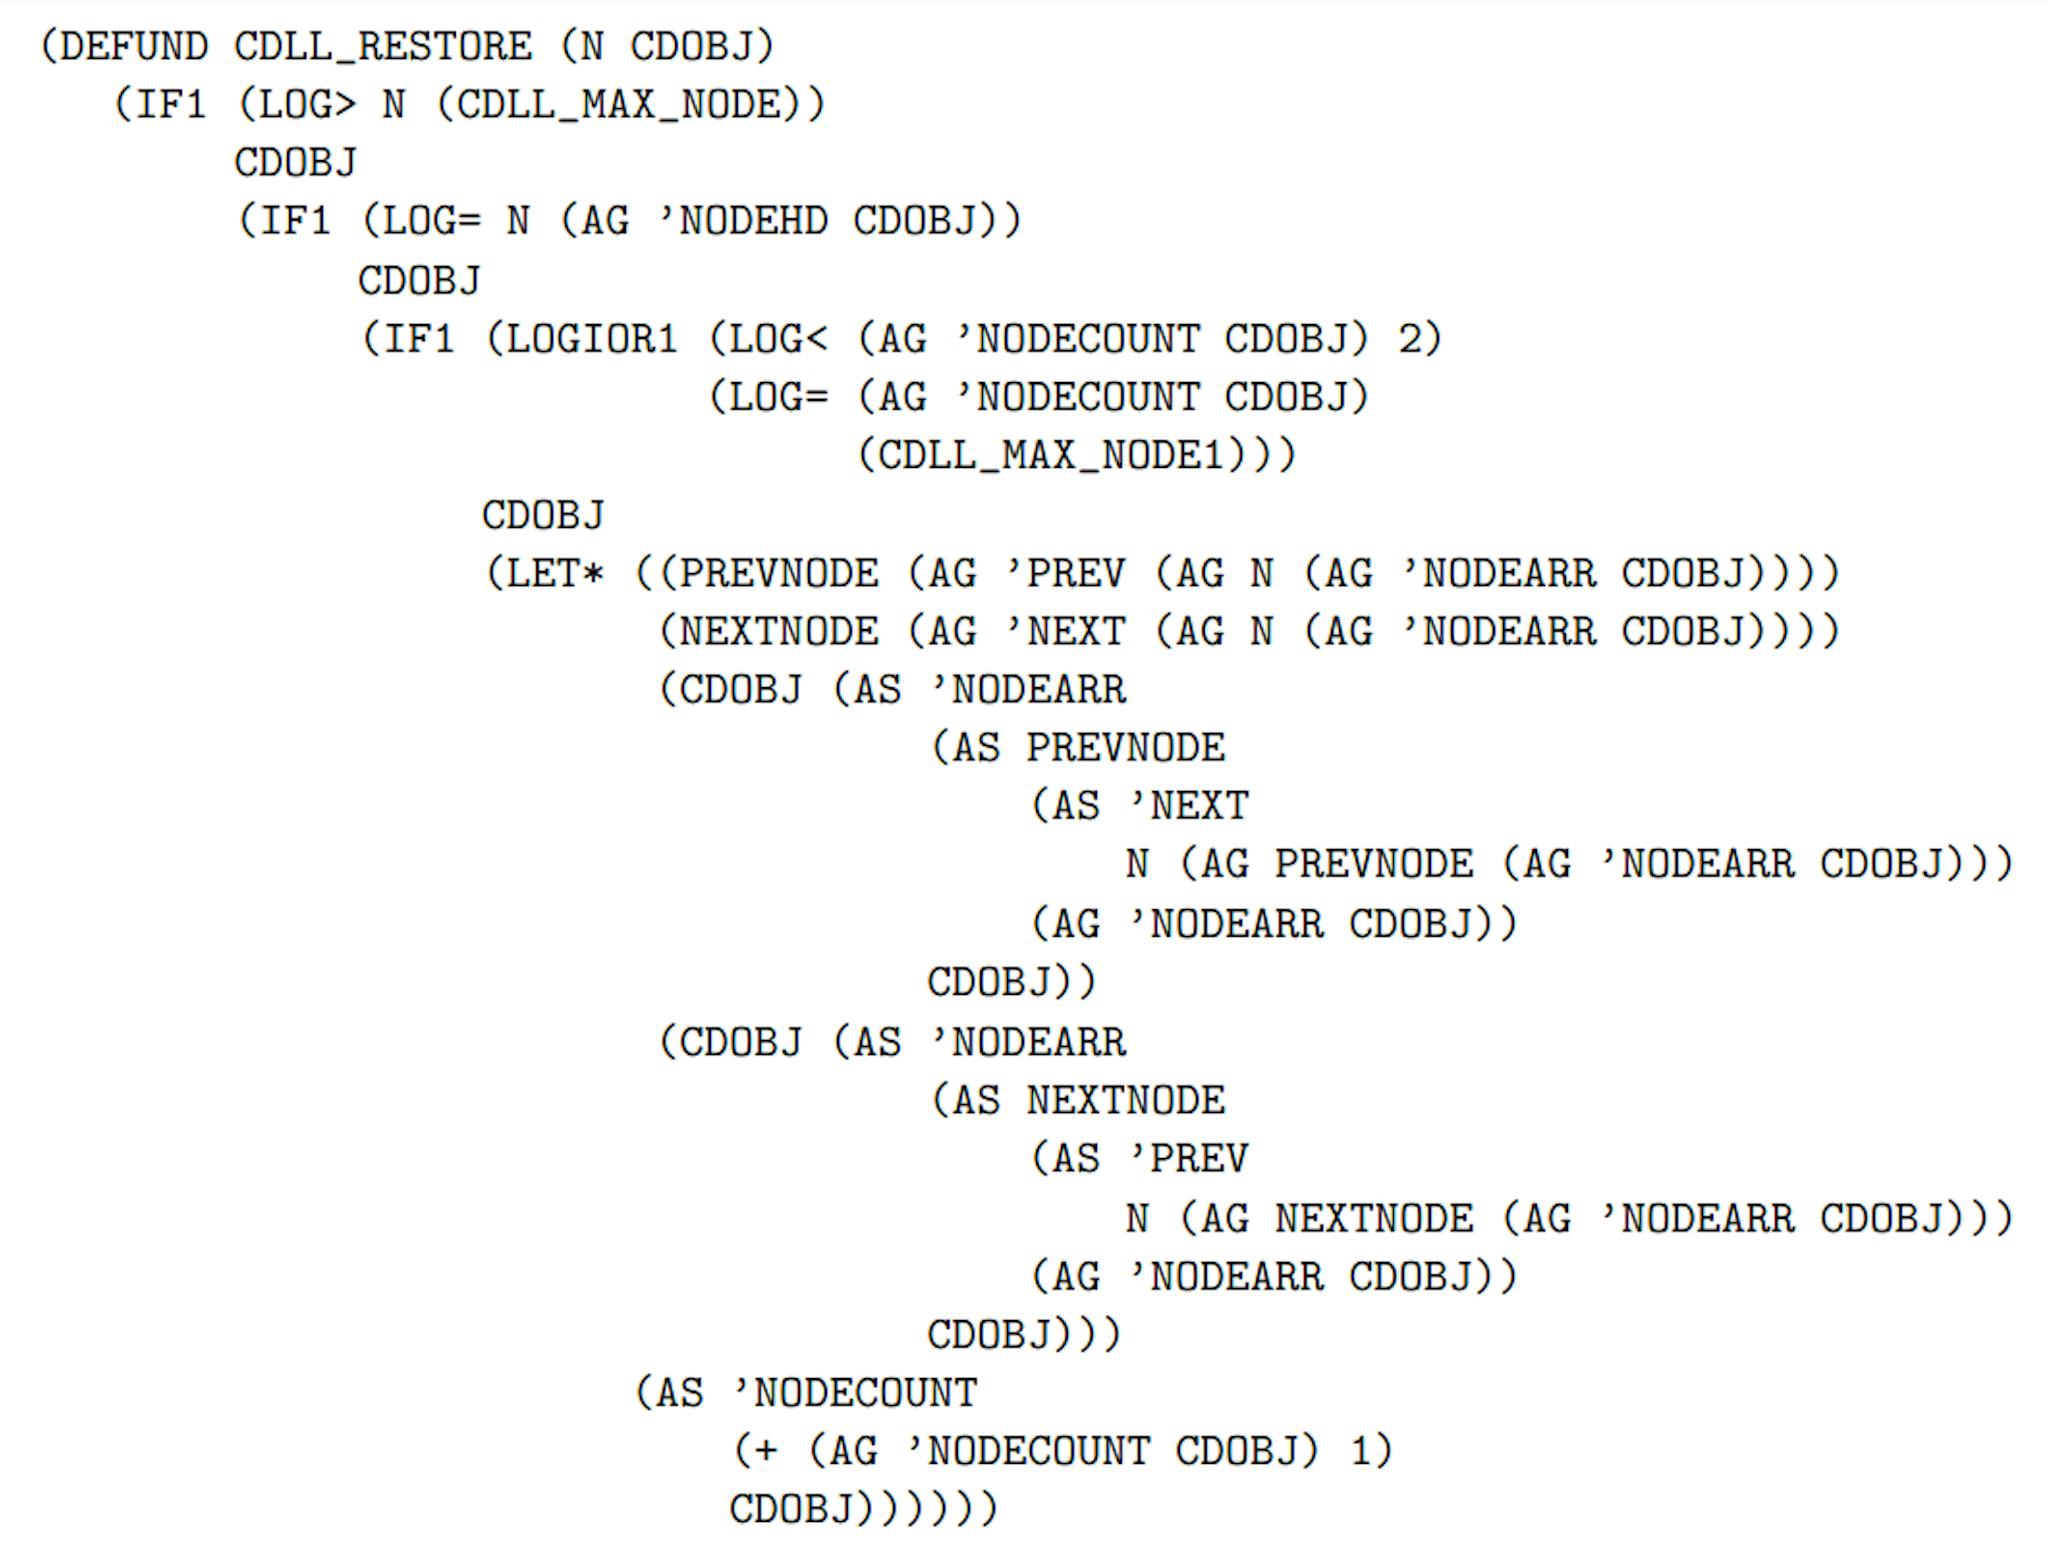 Figure 6: cdll_restore () function translated to ACL2 using the RAC tools.